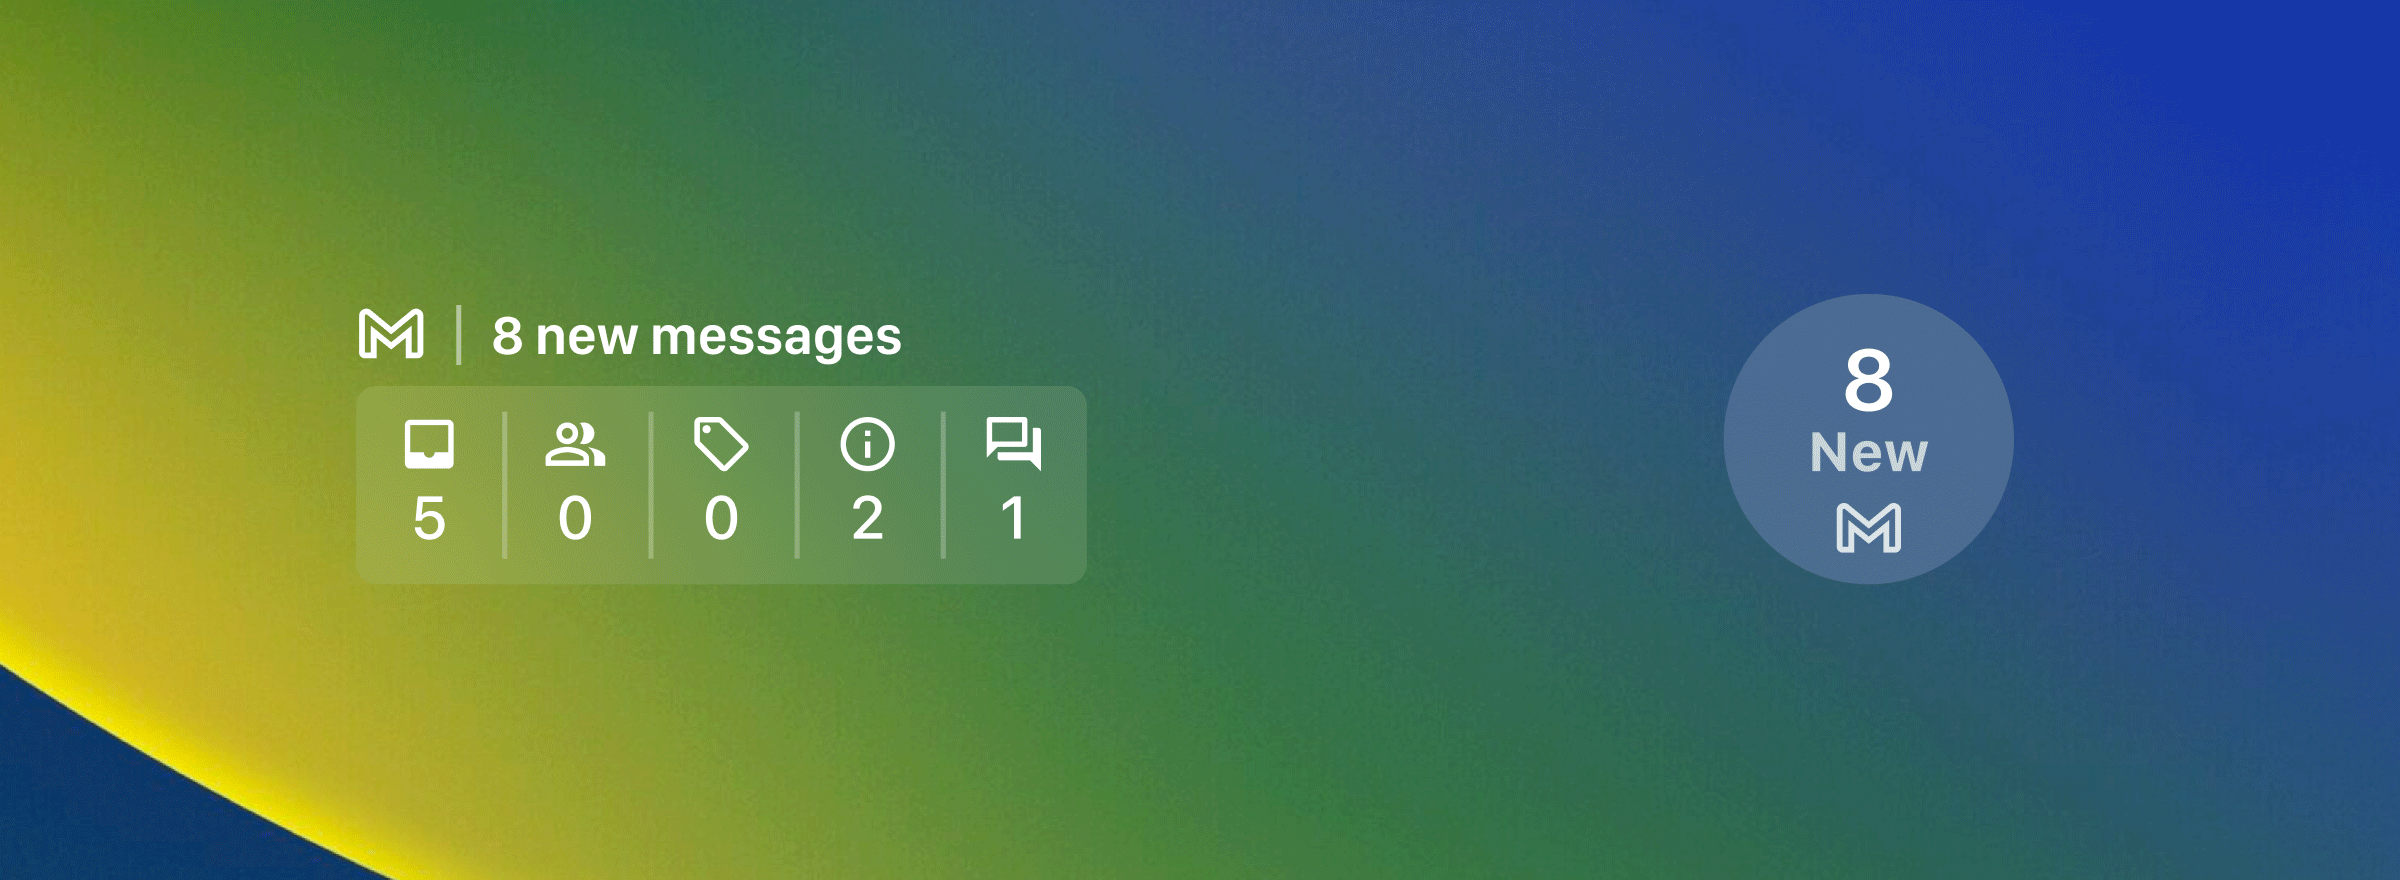 GIF of Gmail Lock Screen widget showing eight unread emails in an inbox.